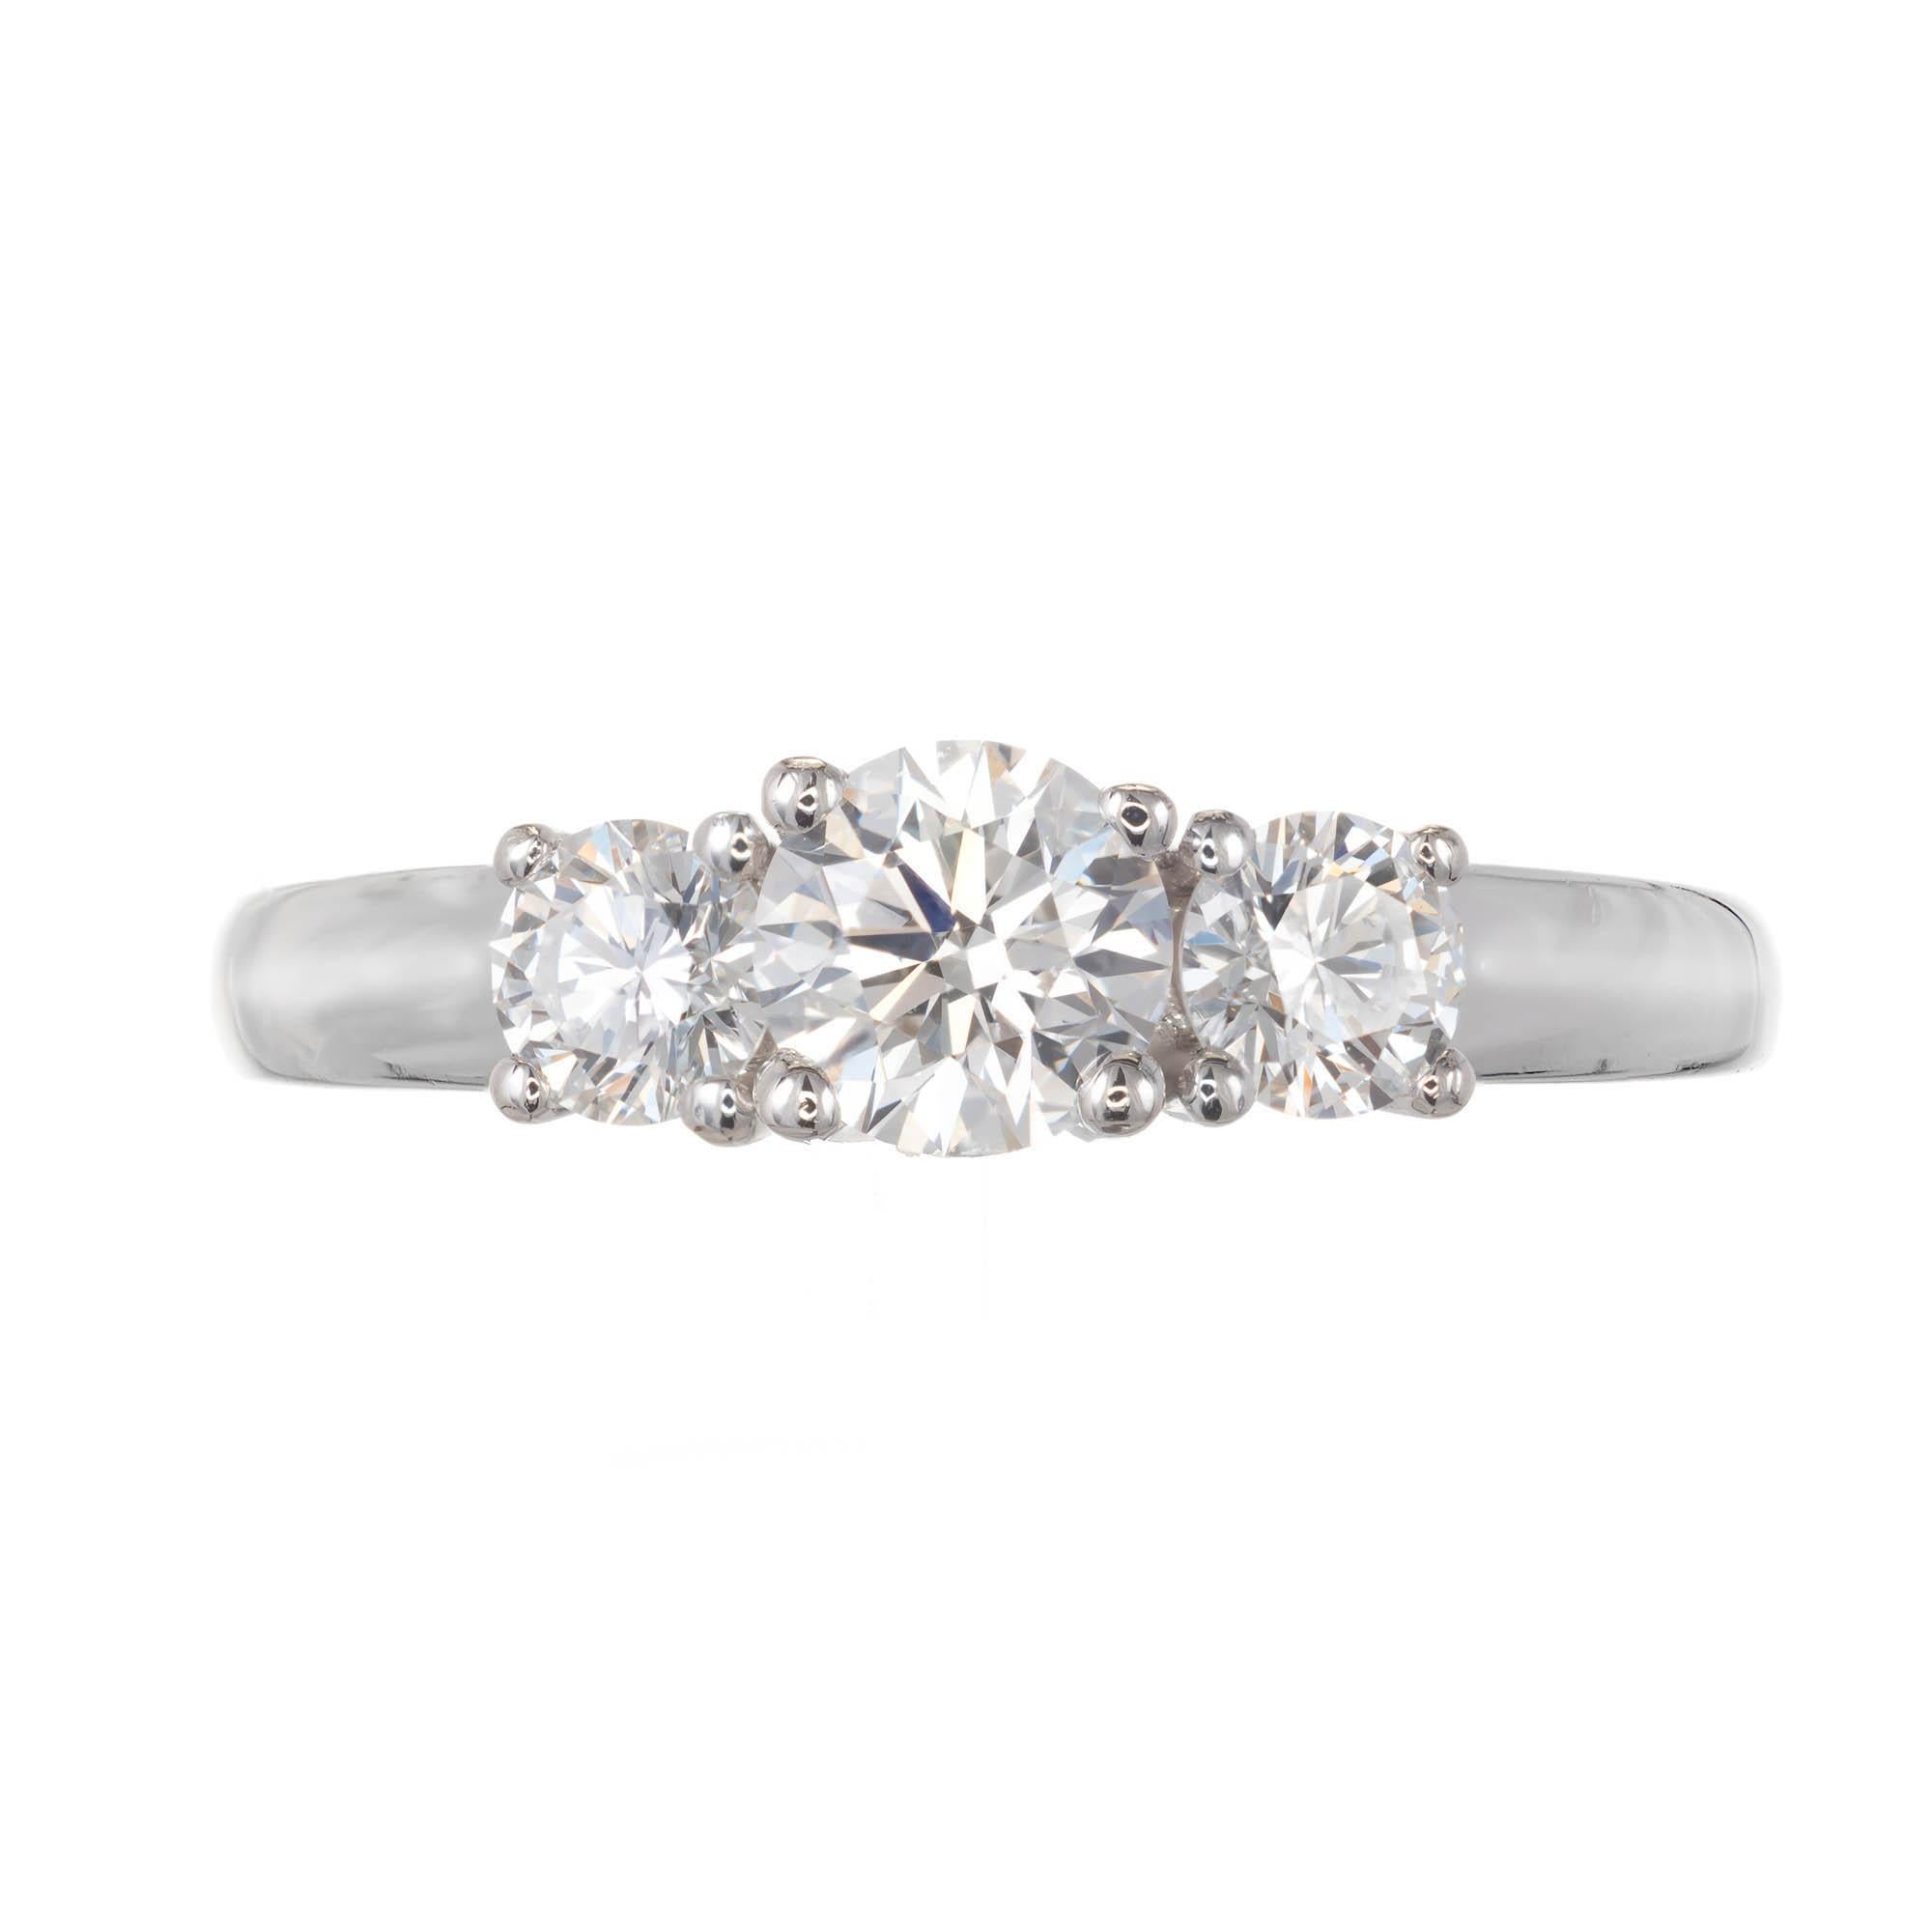 Birks diamond engagement ring. Platinum three-stone setting with round center diamond with two round accent side diamonds. 

1 round Ideal brilliant cut diamond, approx. total weight .50cts, E-F, VS1, Depth: 59.7% Table: 54%, GIA certificate